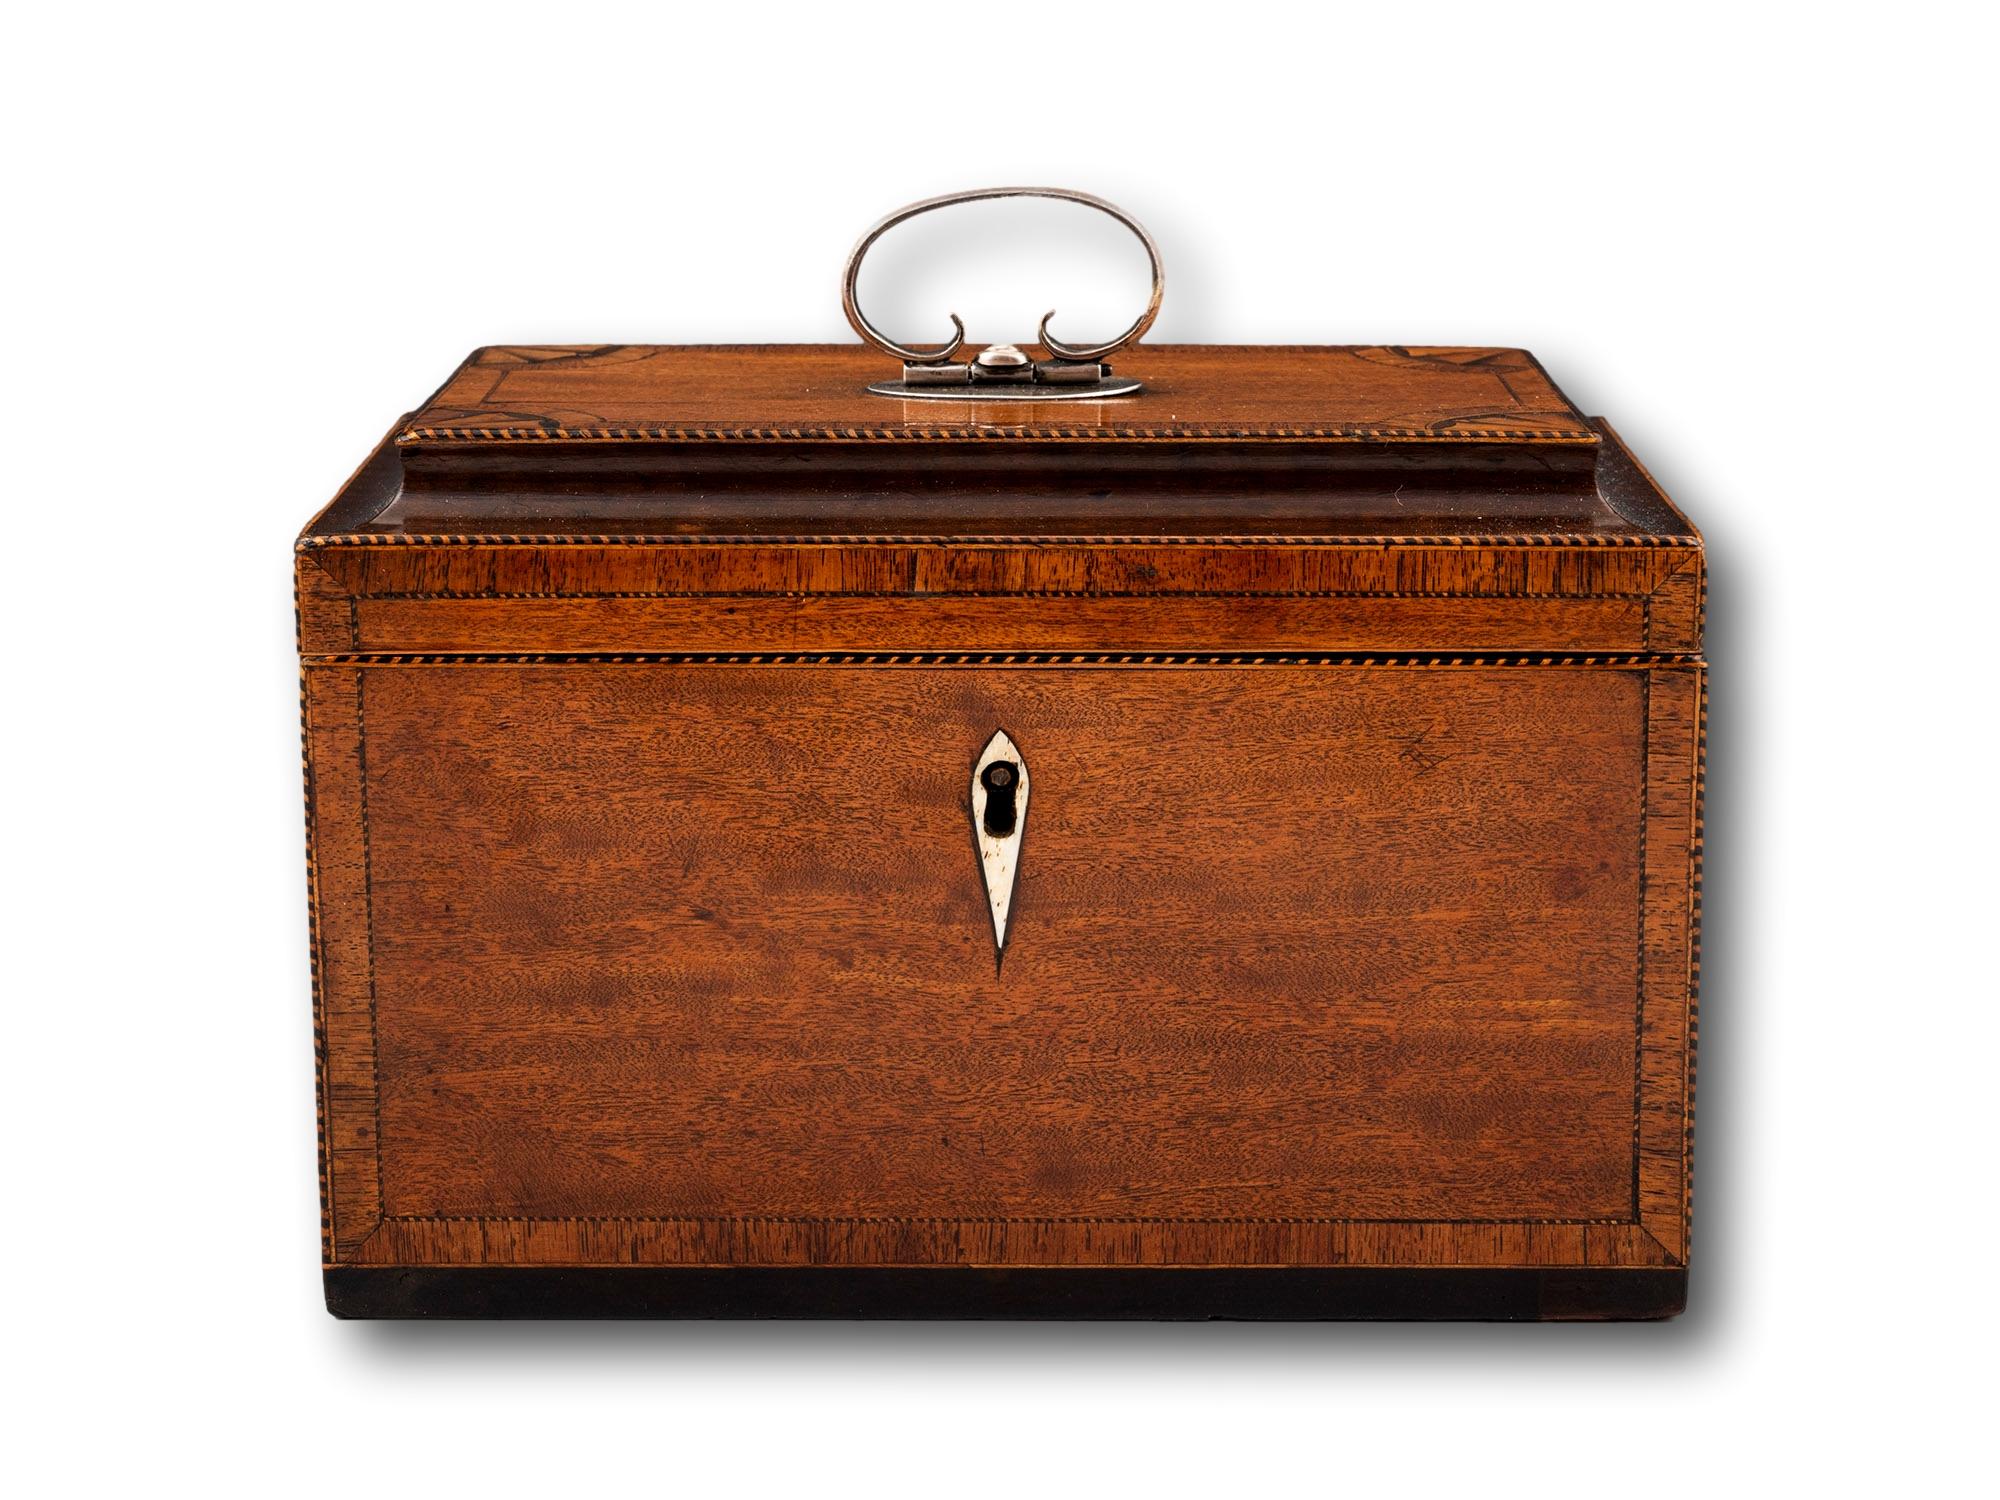 Georgian Tea Chest with Boxwood & Ebony Checkered Stringing

From our Tea Caddy collection, we are delighted to offer this Rare Georgian Satinwood Tea Chest. The Tea Chest of rectangular form with cavetto raised lid veneered in Satinwood with